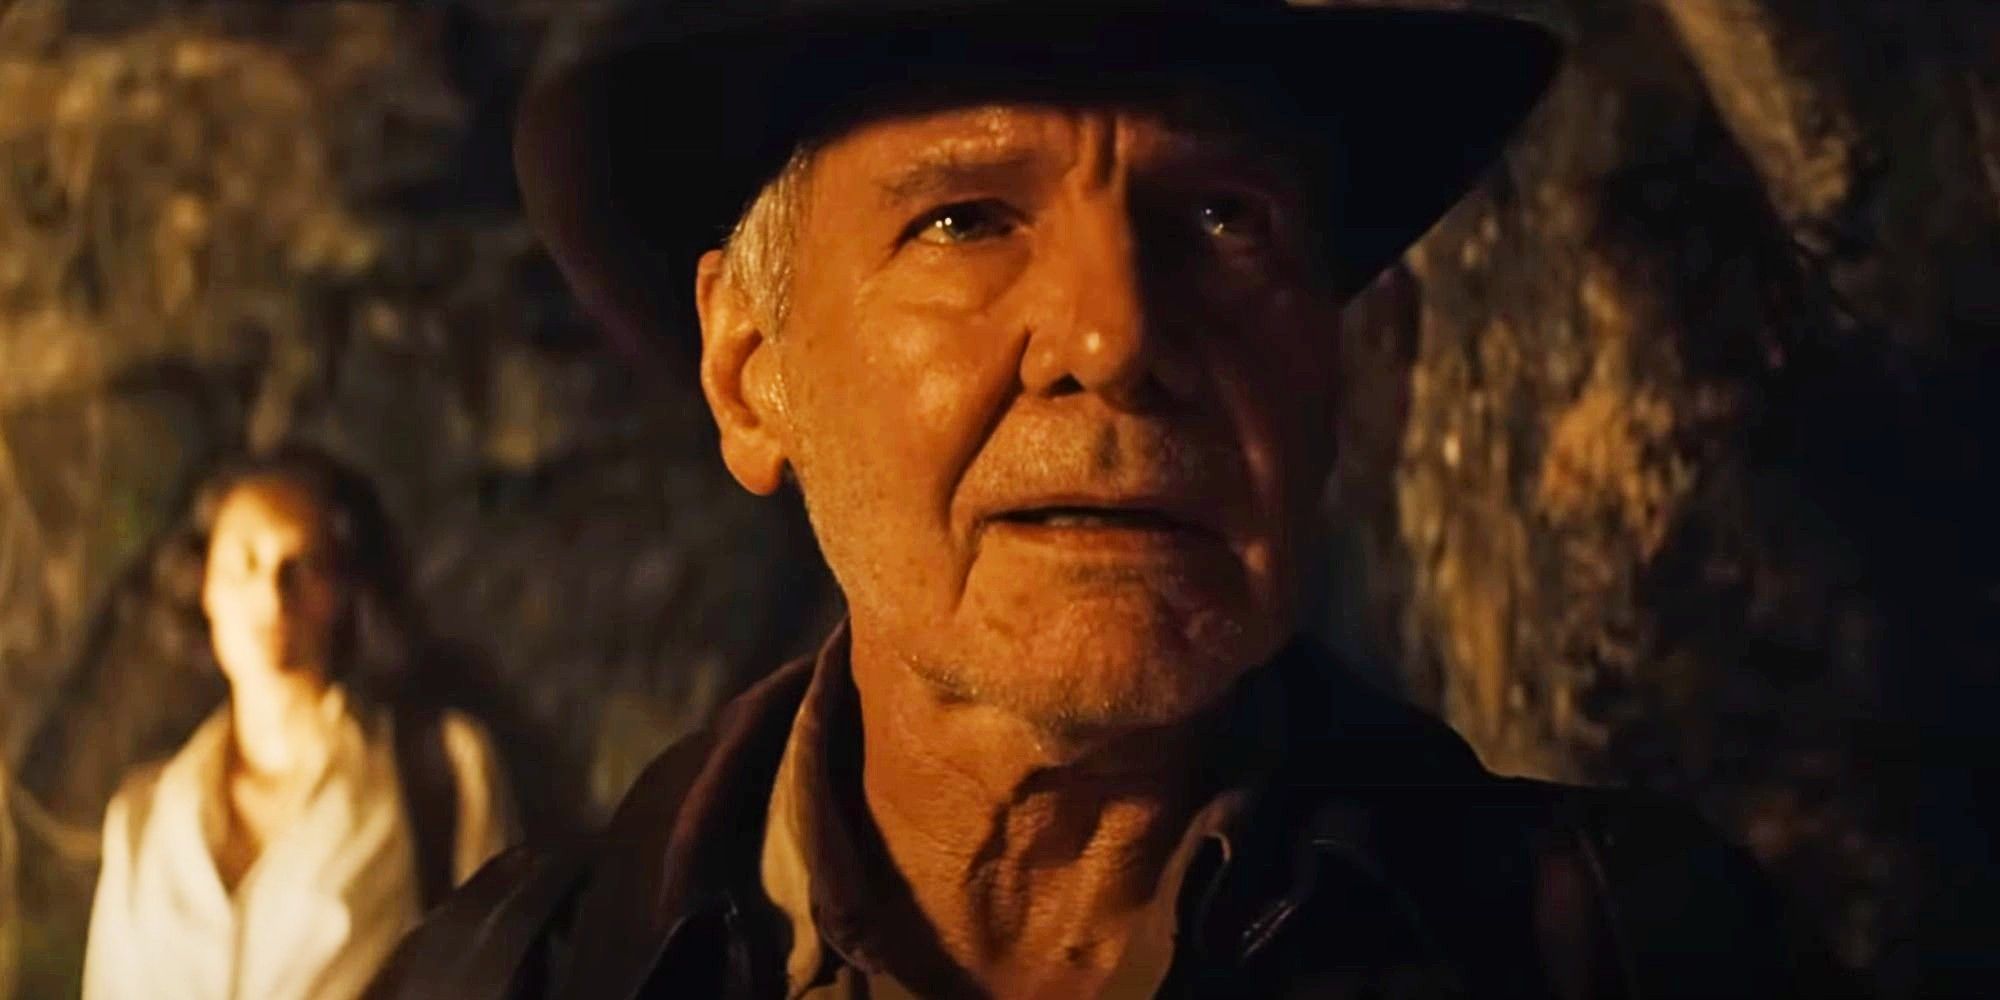 Indiana Jones Spinoff Series Reportedly Scrapped at Disney+